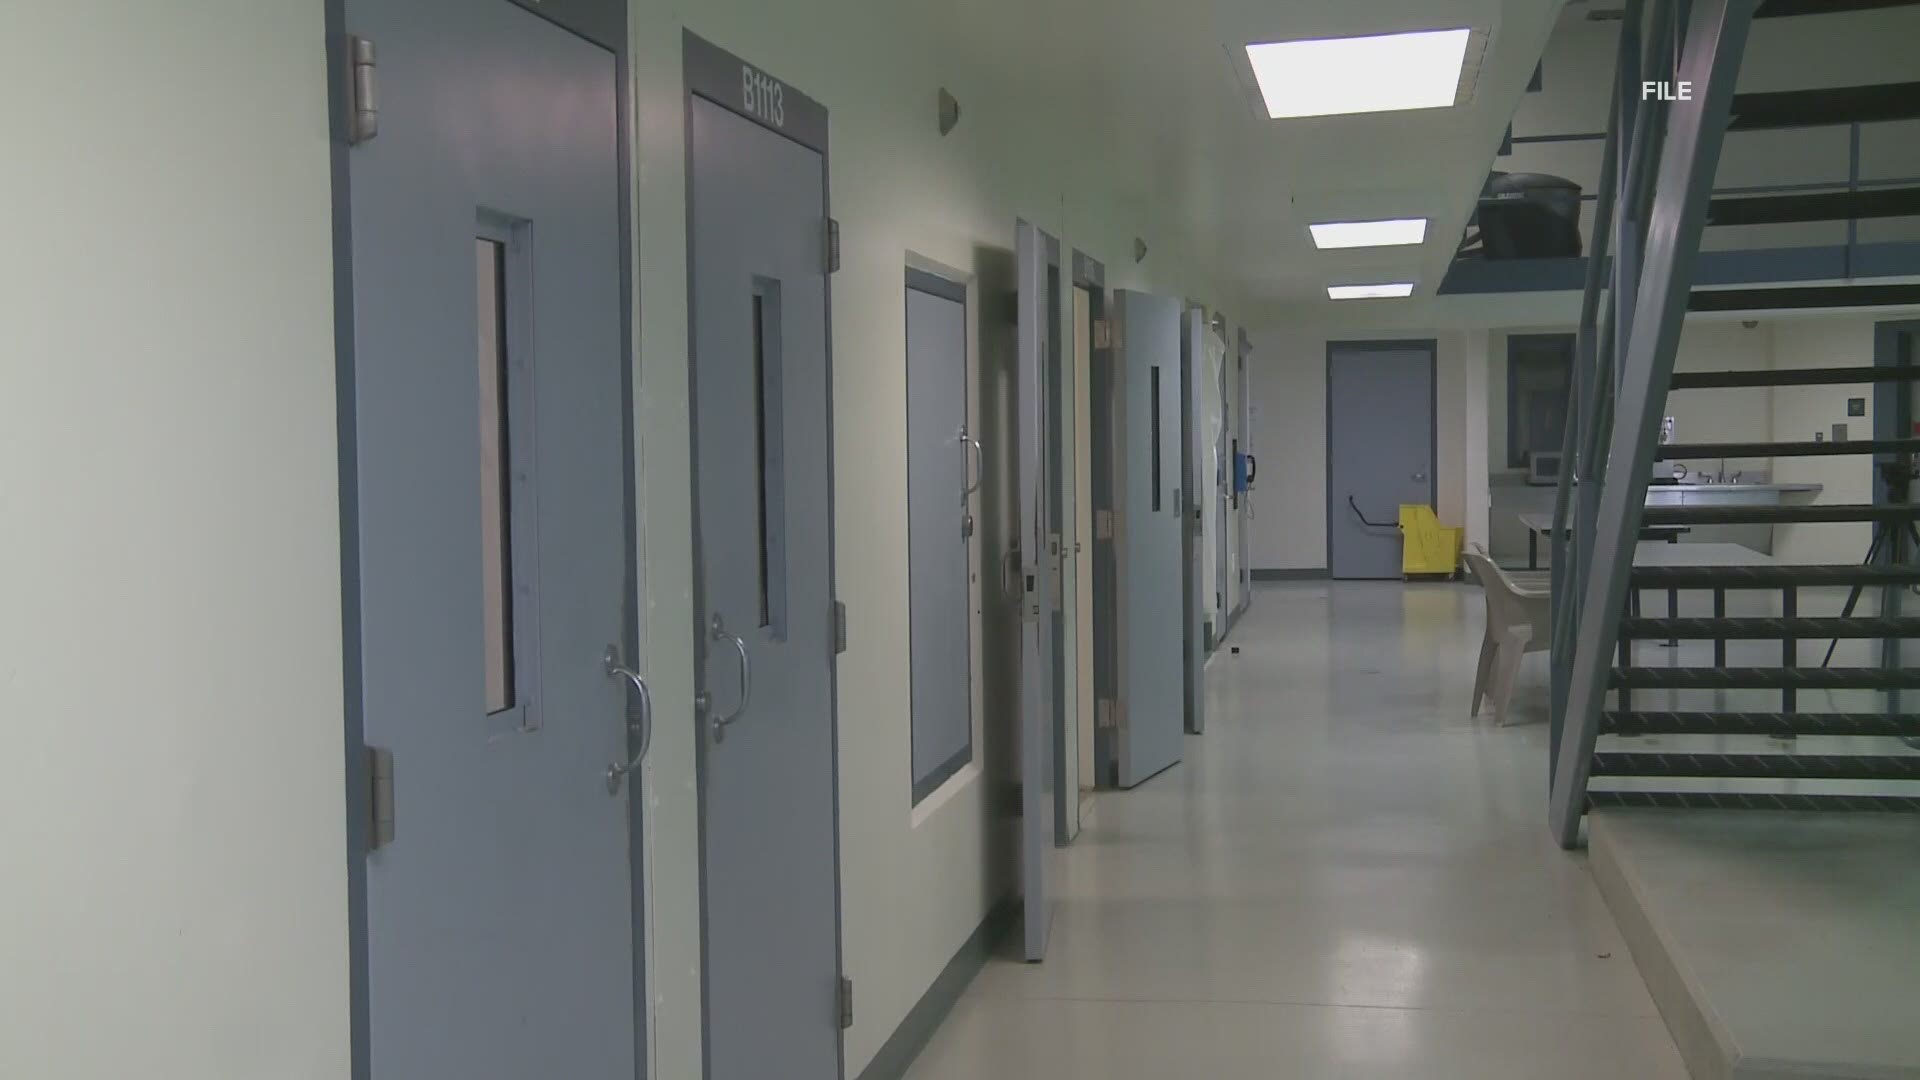 State of Maine to review pepper-spraying of mentally ill inmates